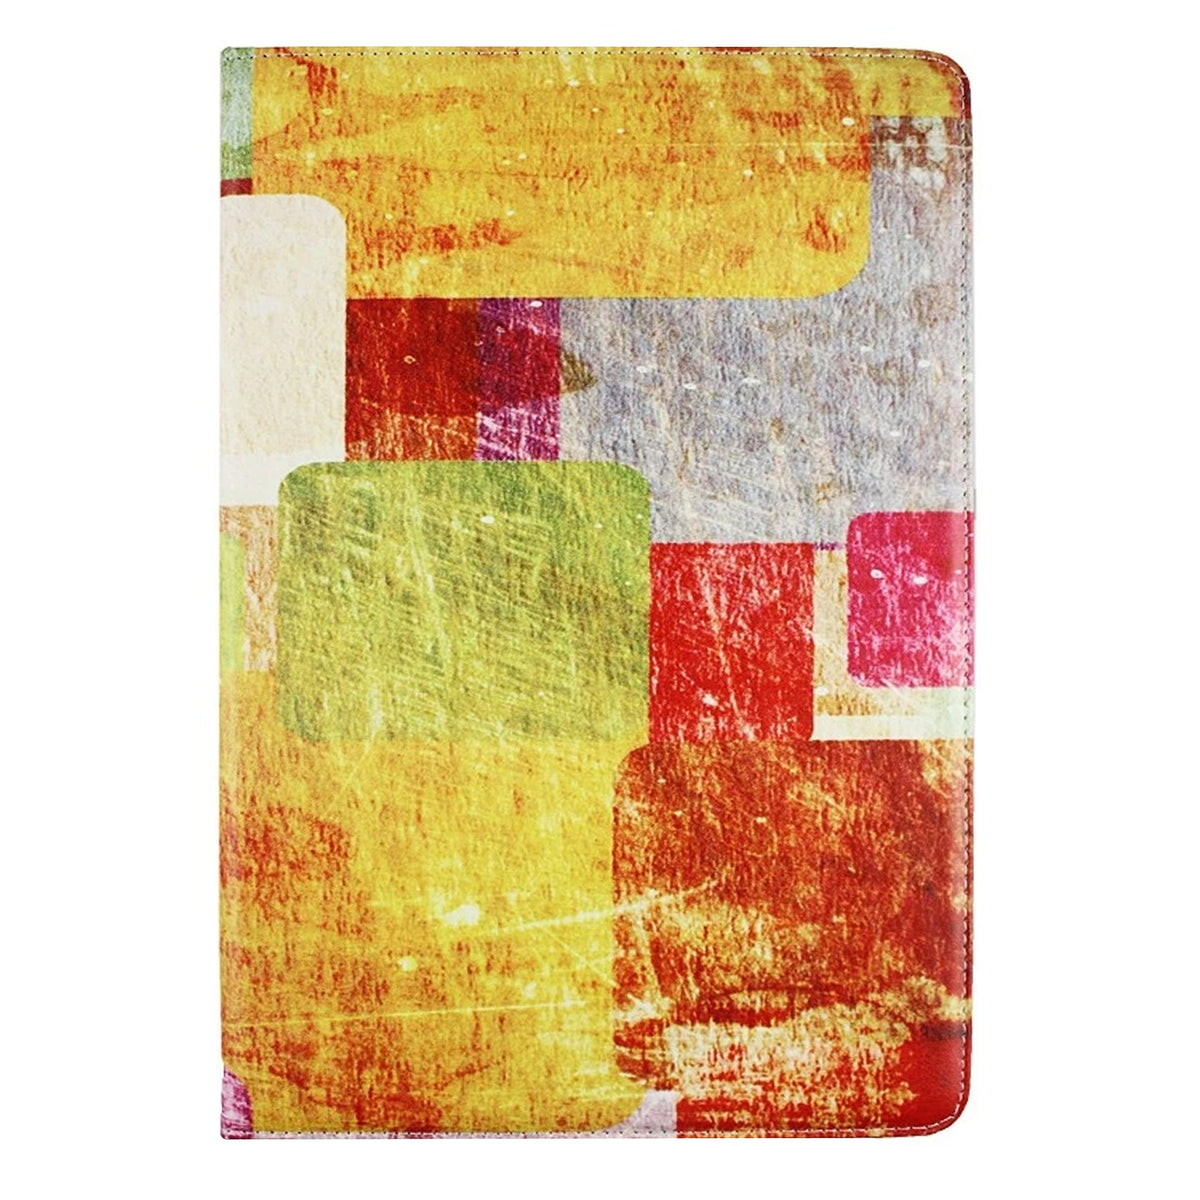 Universal Tablet Case - Colored Tiles